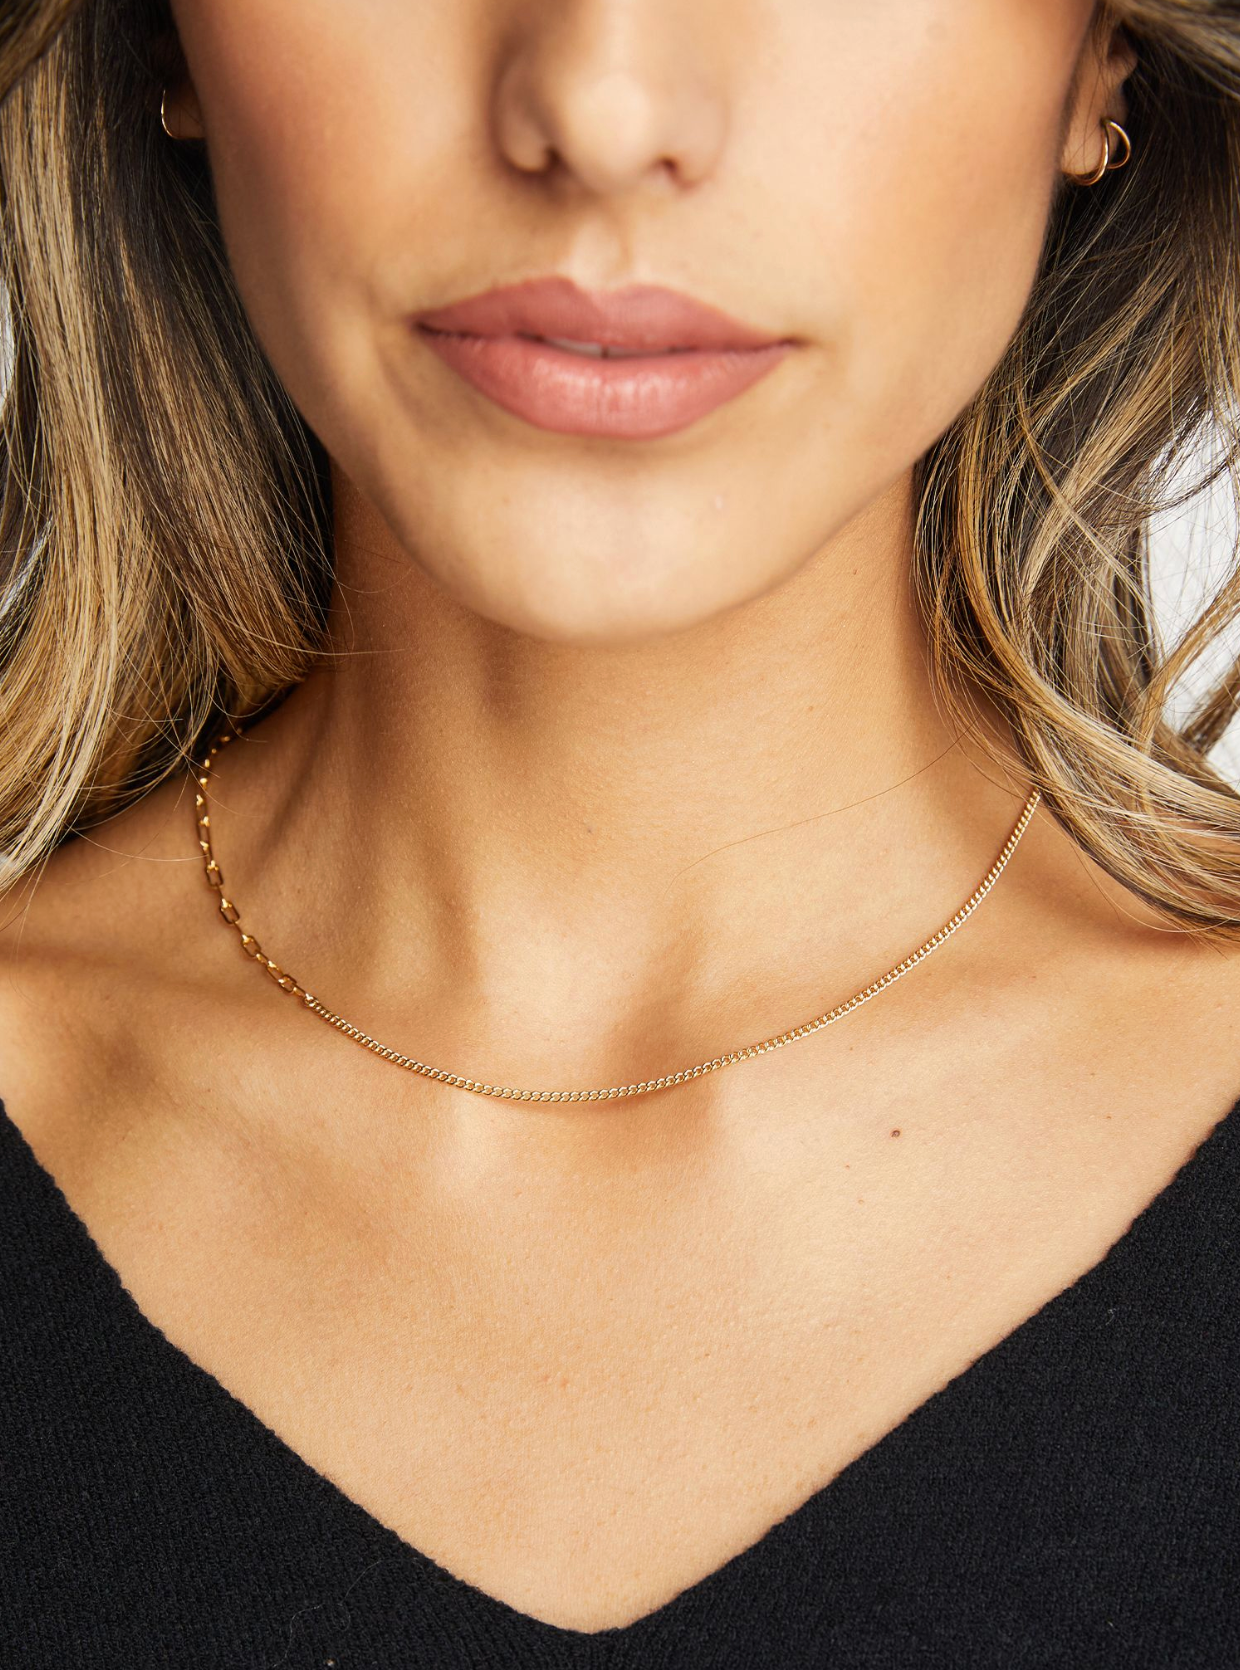 Curb Chain Essential Necklace